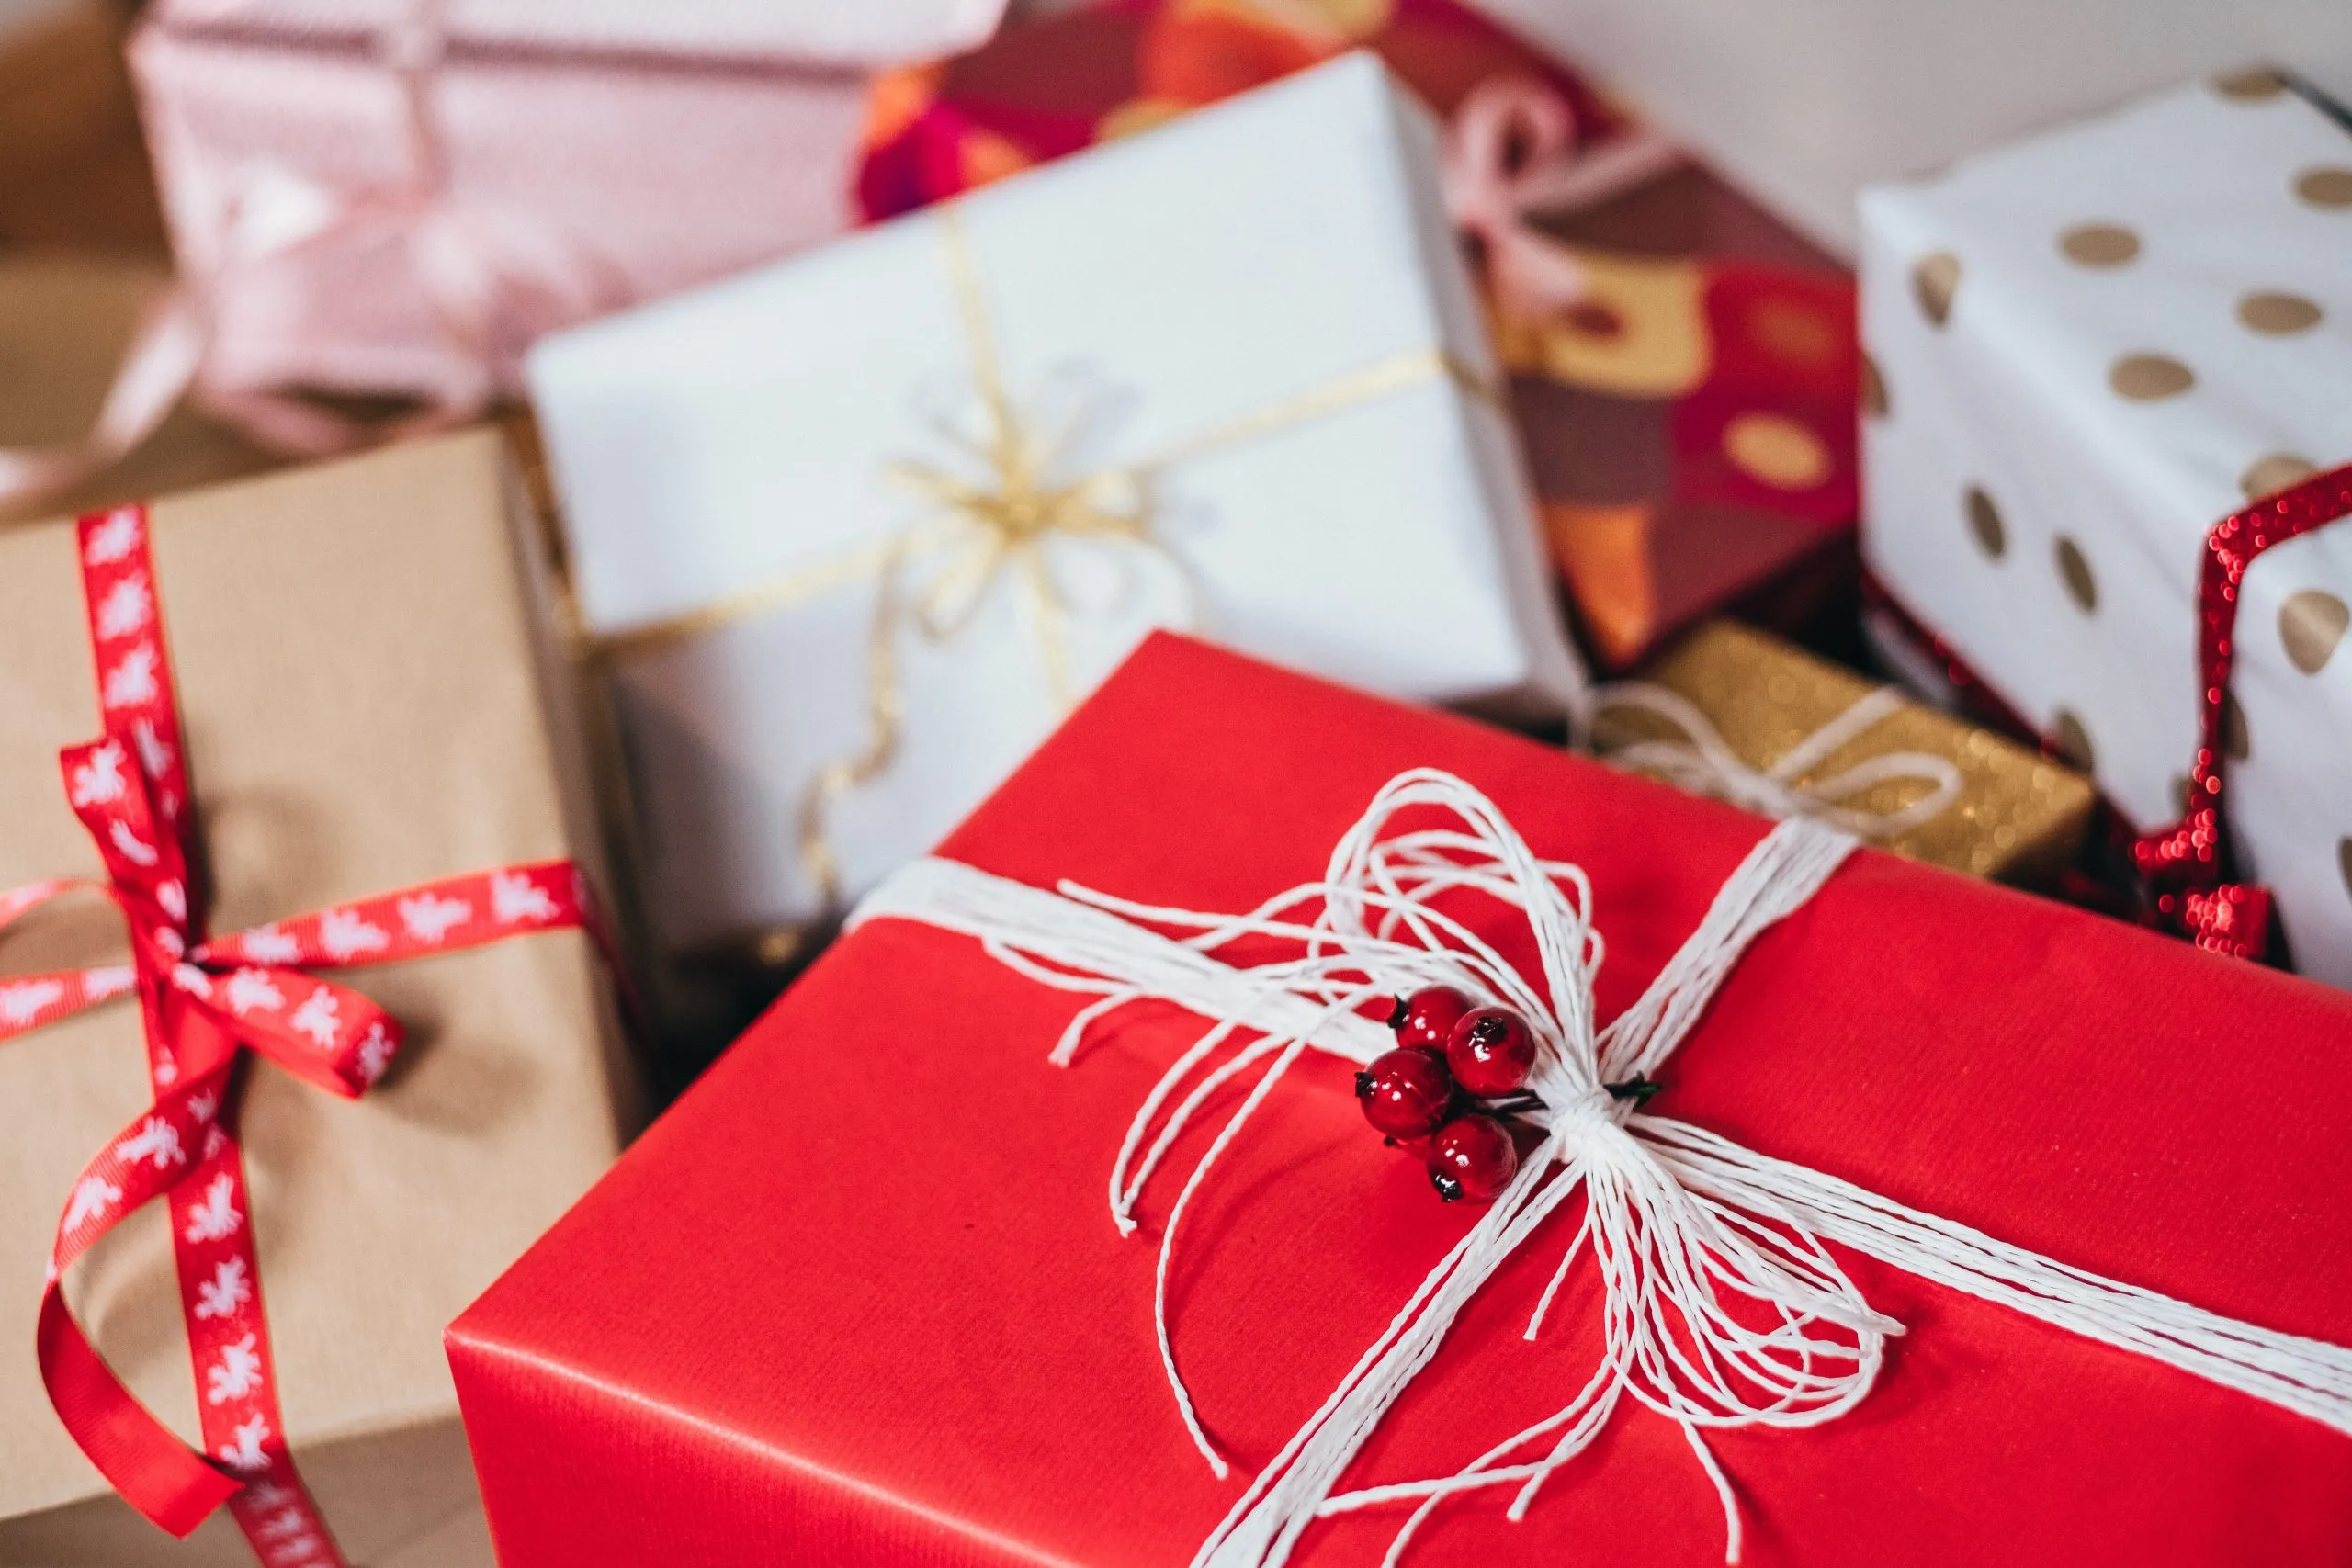 Why are personalized gifts a better option for gifting purposes?